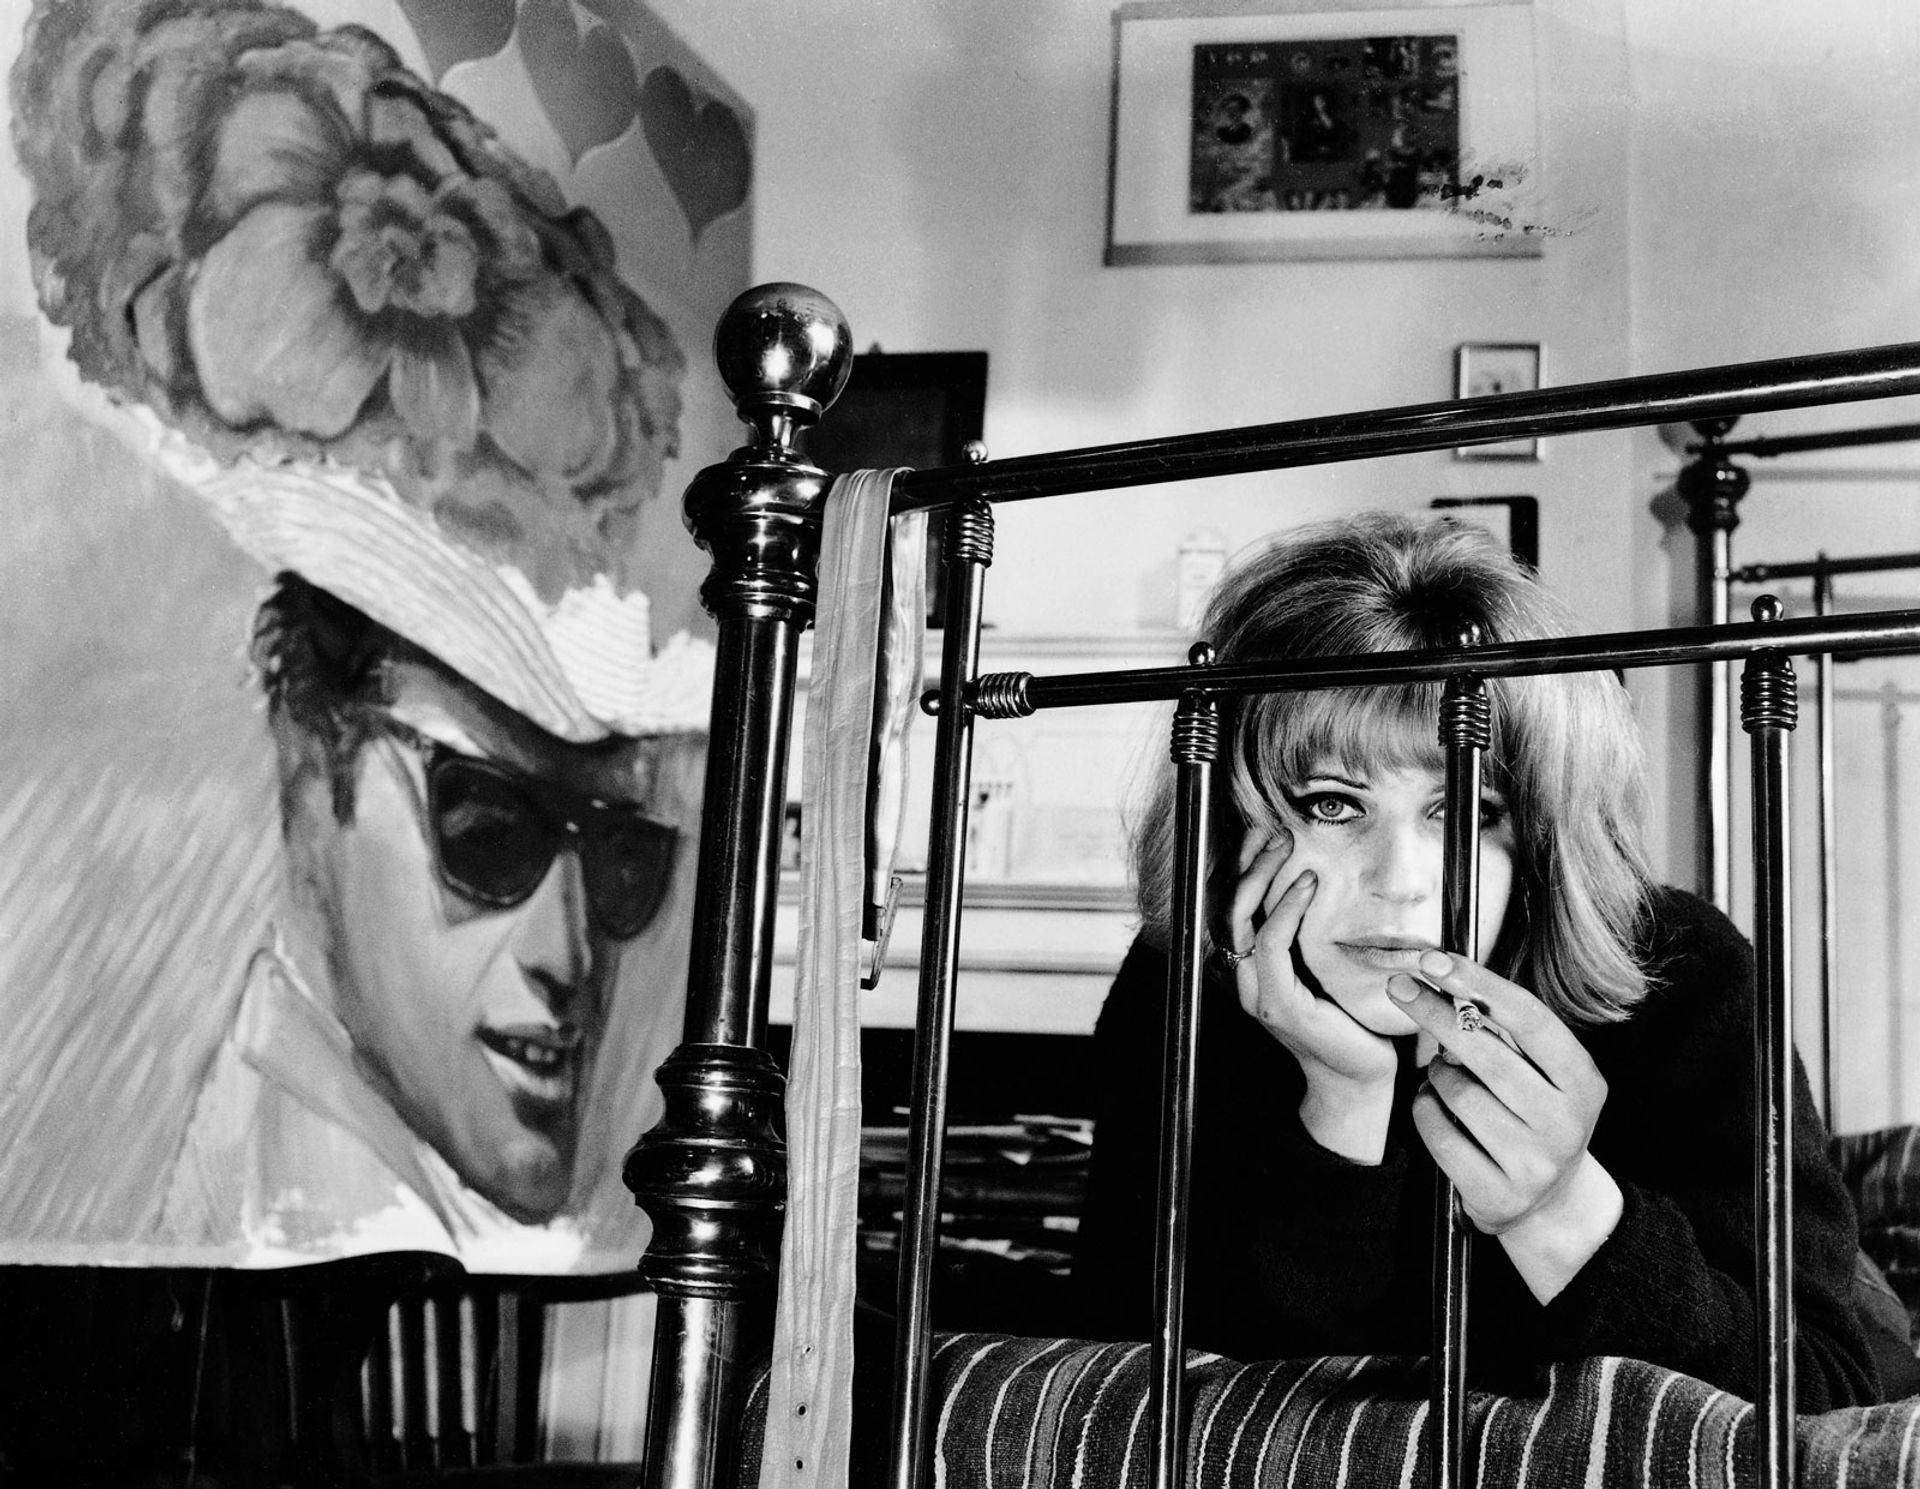 Pauline Boty in 1963 alongside her painting titled With Love to Jean-Paul Belmondo (1962) © The Lewinski Archive at Chatsworth/Bridgeman Images